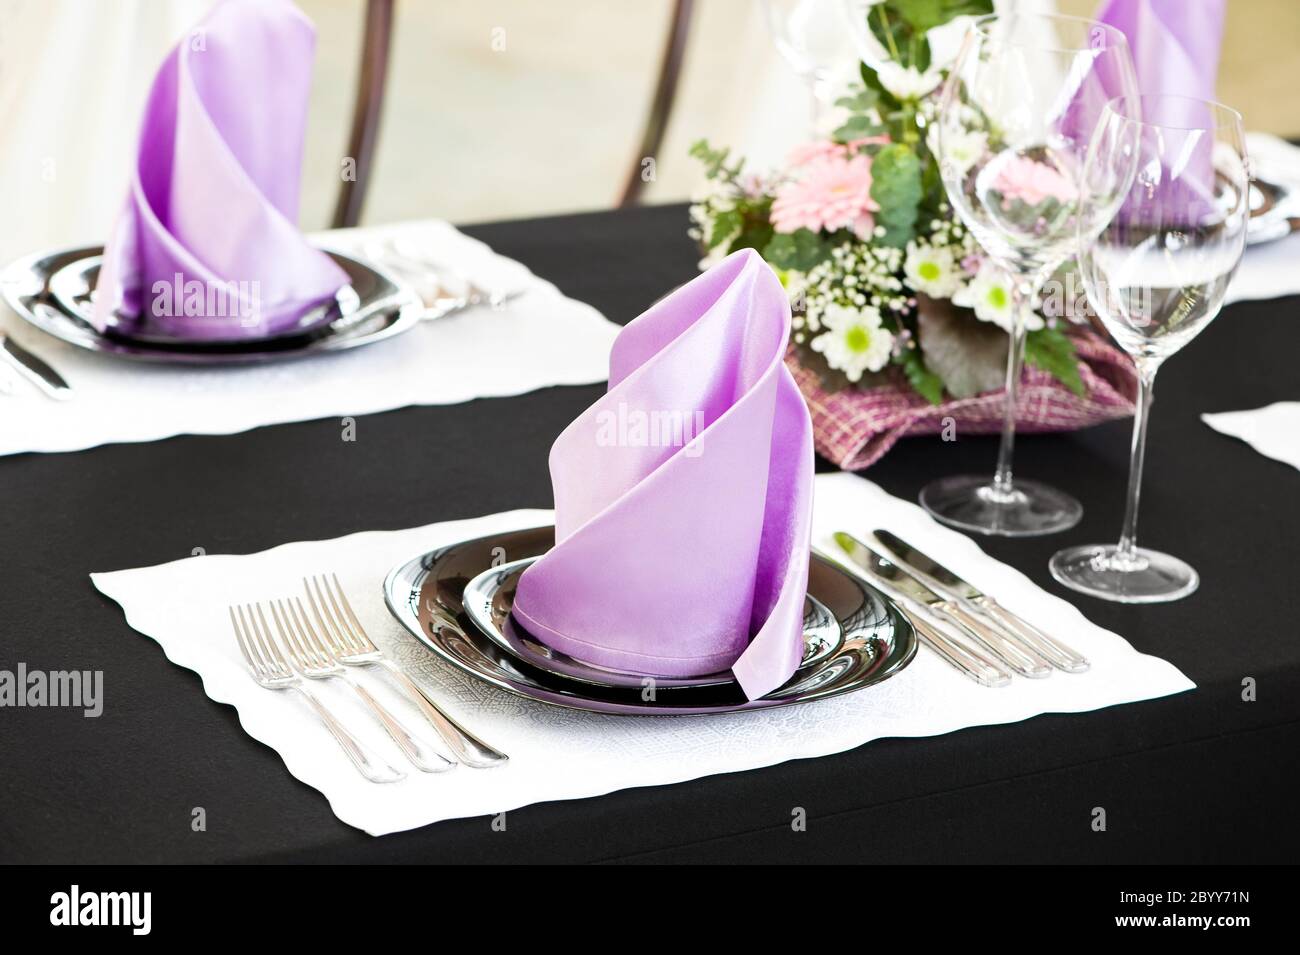 close-up catering table set Stock Photo